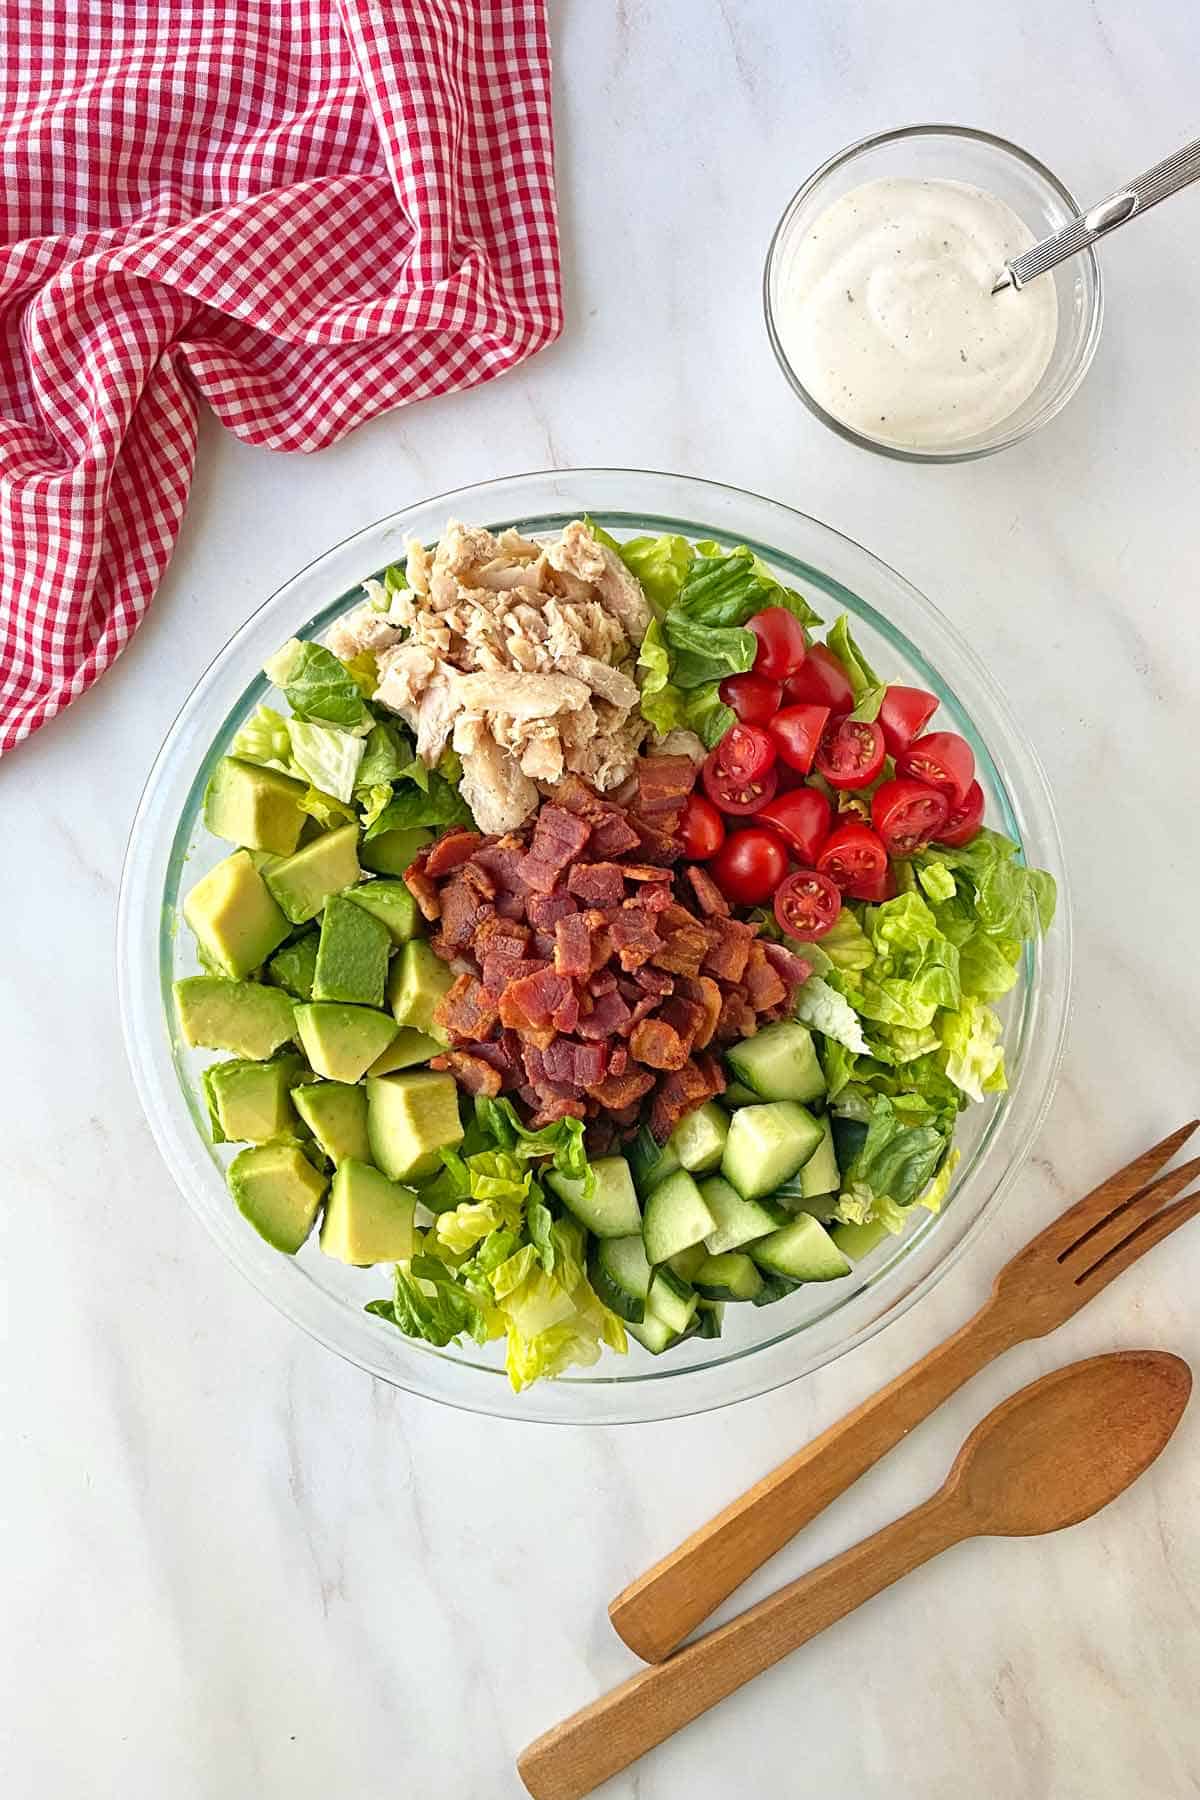 A large bowl of chicken bacon ranch salad, wooden salad tongs, a bowl of Balsamic ranch salad dressing and a red and white napkin.